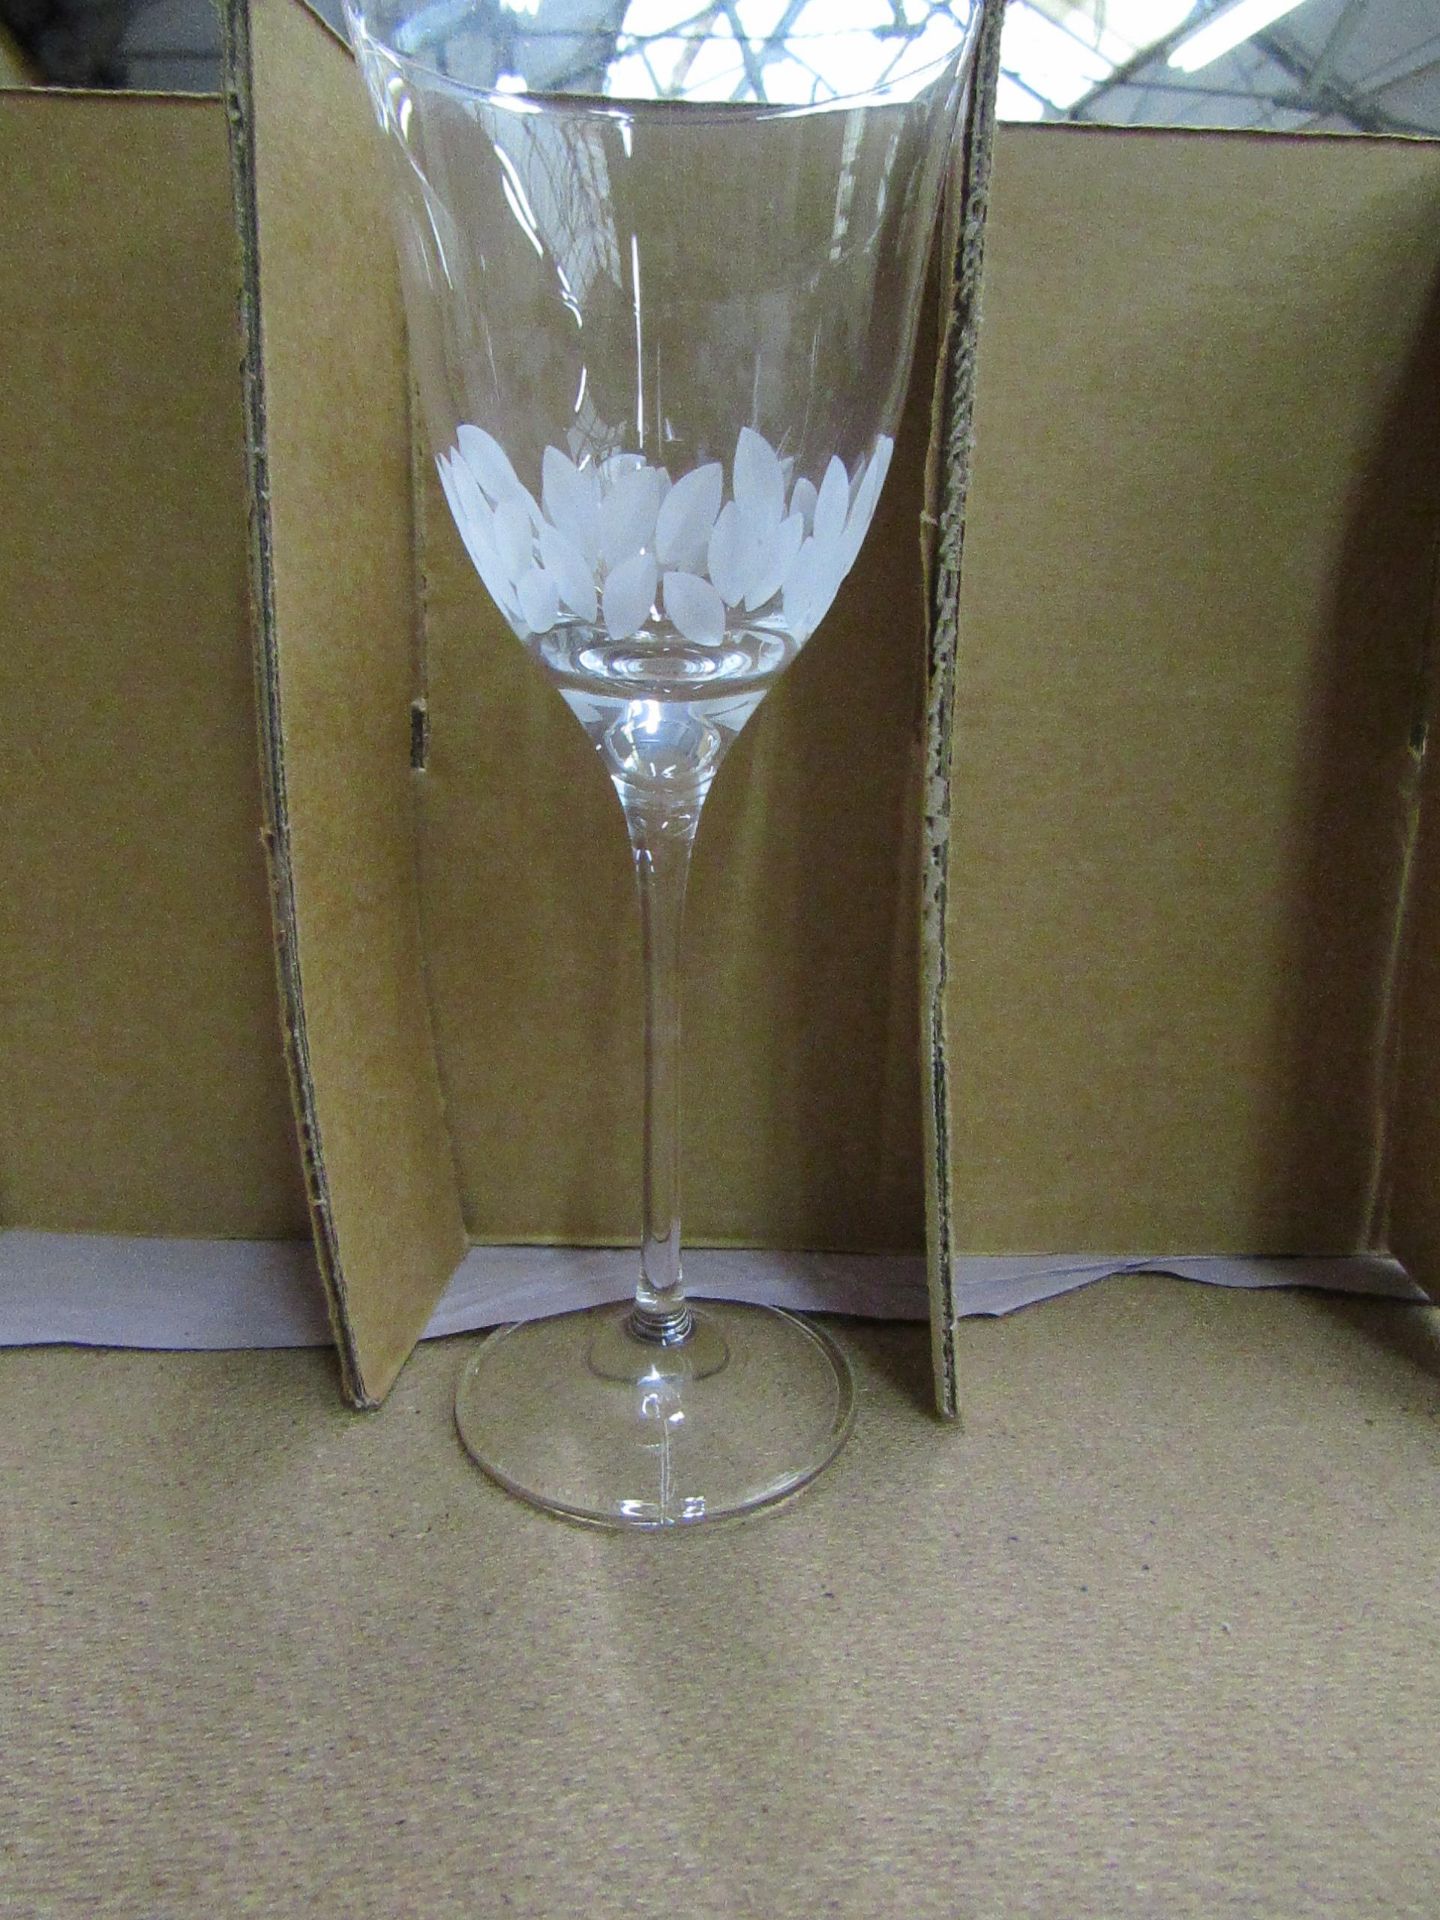 6x Wine Glasses. New - See Image For Design.